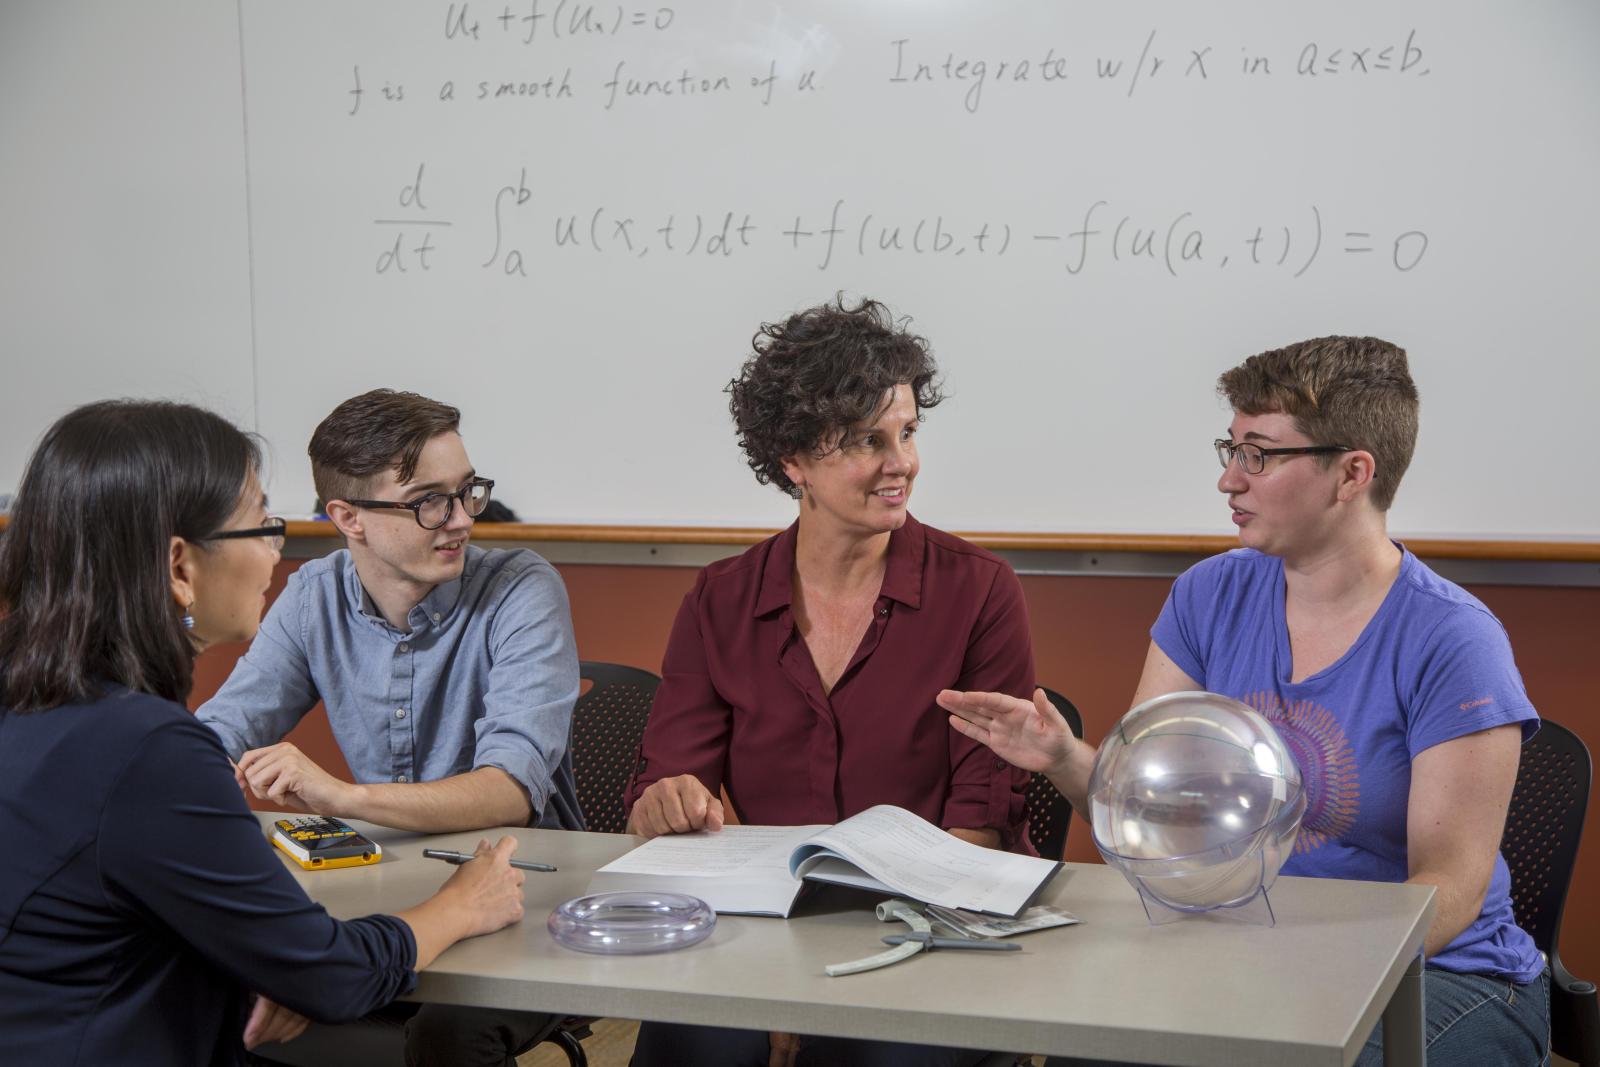 Students and a professor discuss around a table